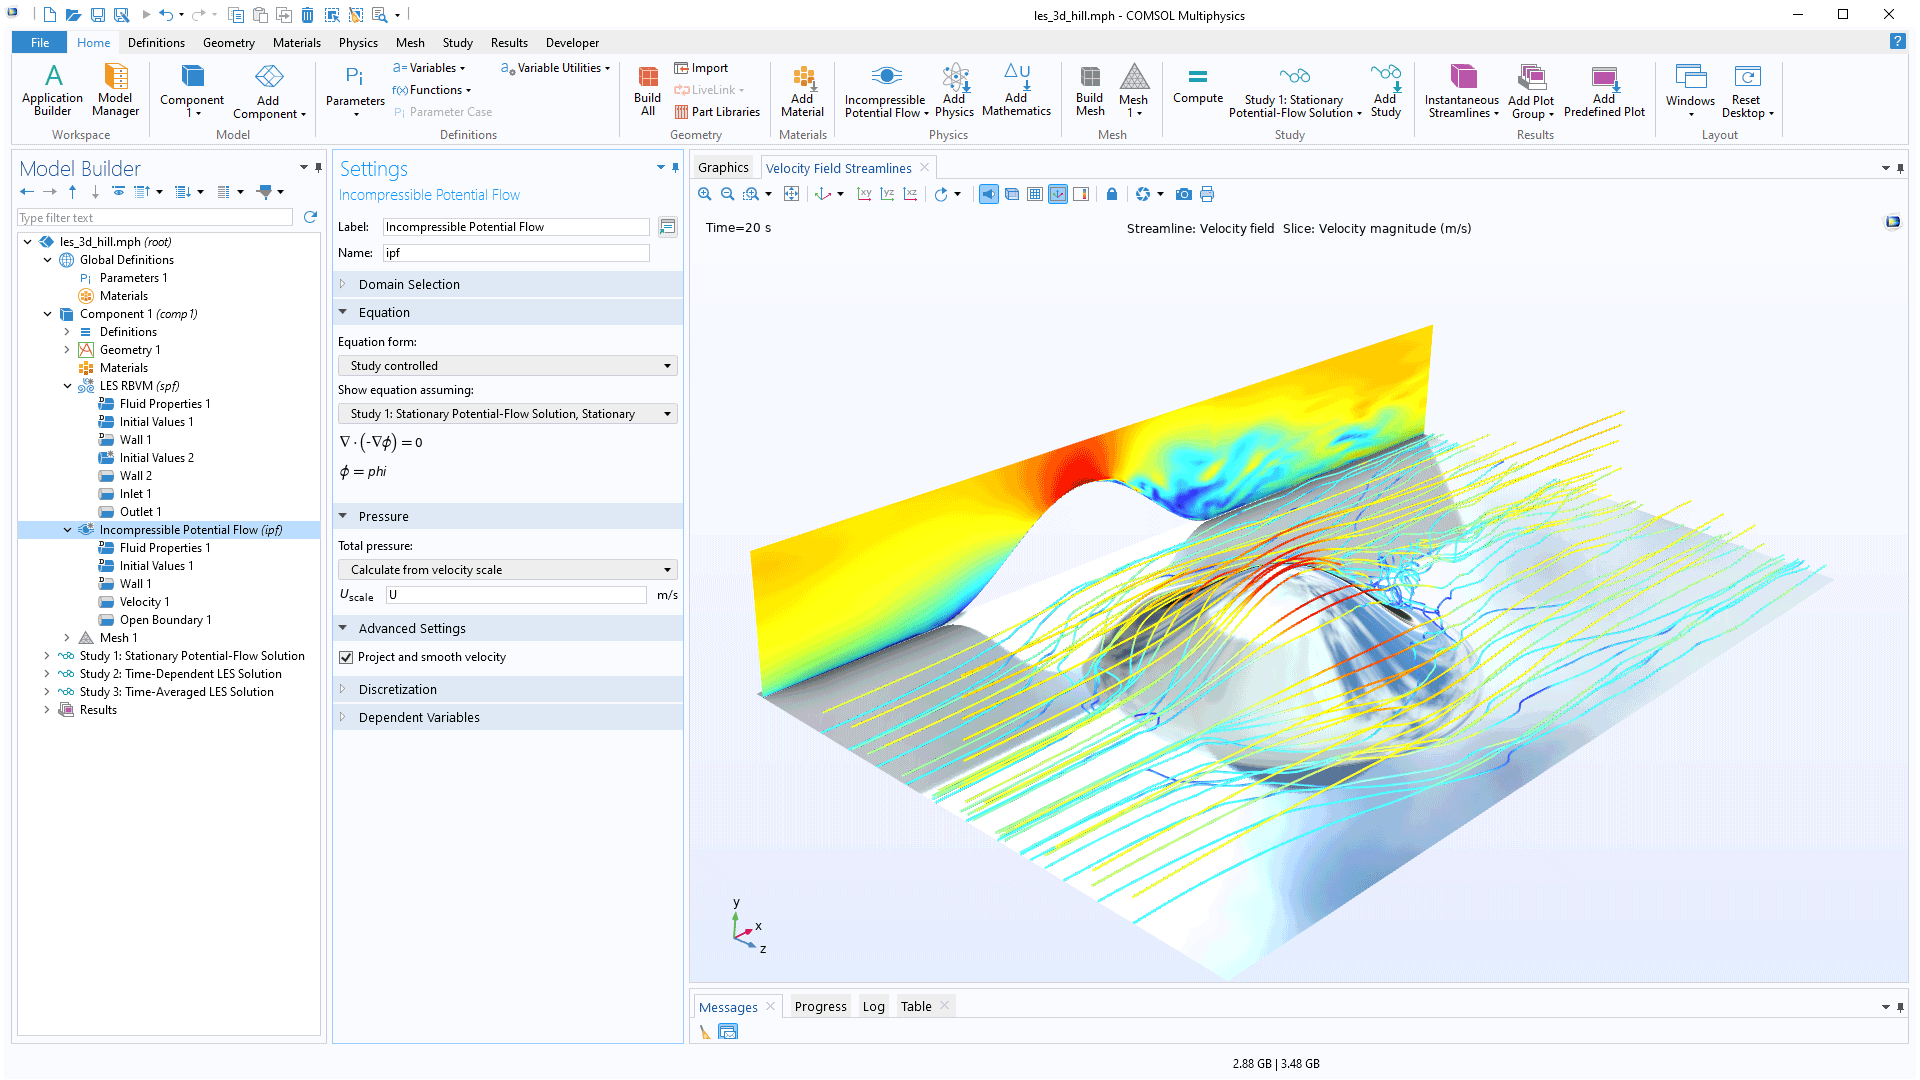 The COMSOL Multiphysics UI showing the Model Builder with the Incompressible Potential Flow node highlighted, the corresponding Settings window, and a 3D hill model in the Graphics window.